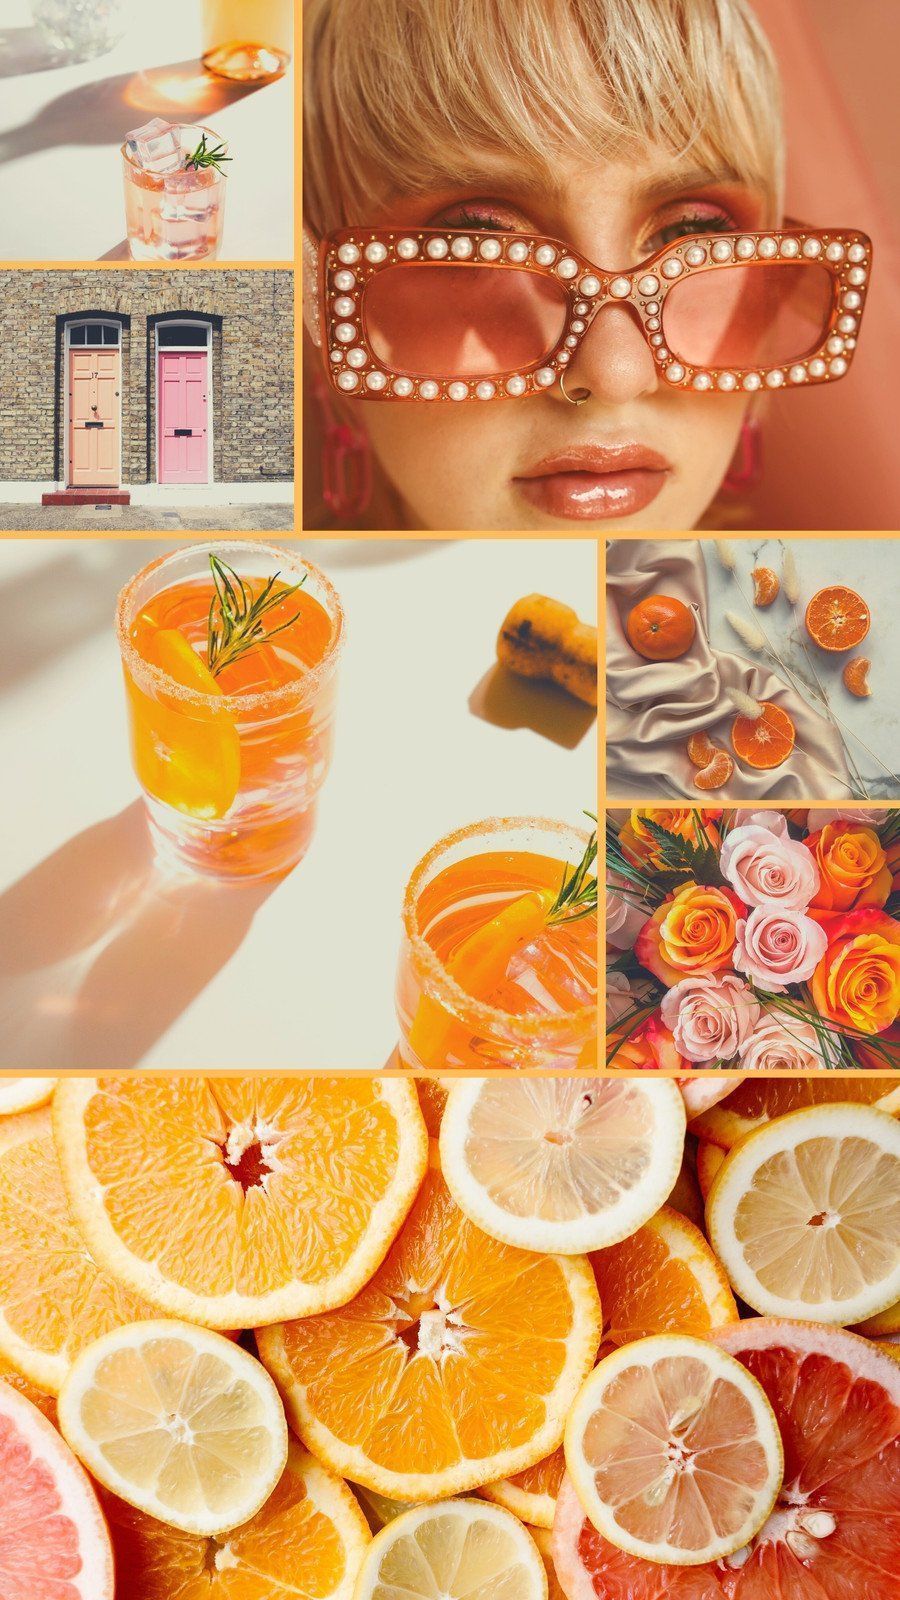 A collage of orange and pink images including a woman wearing sunglasses, orange slices, and a drink. - Orange, fruit, bright